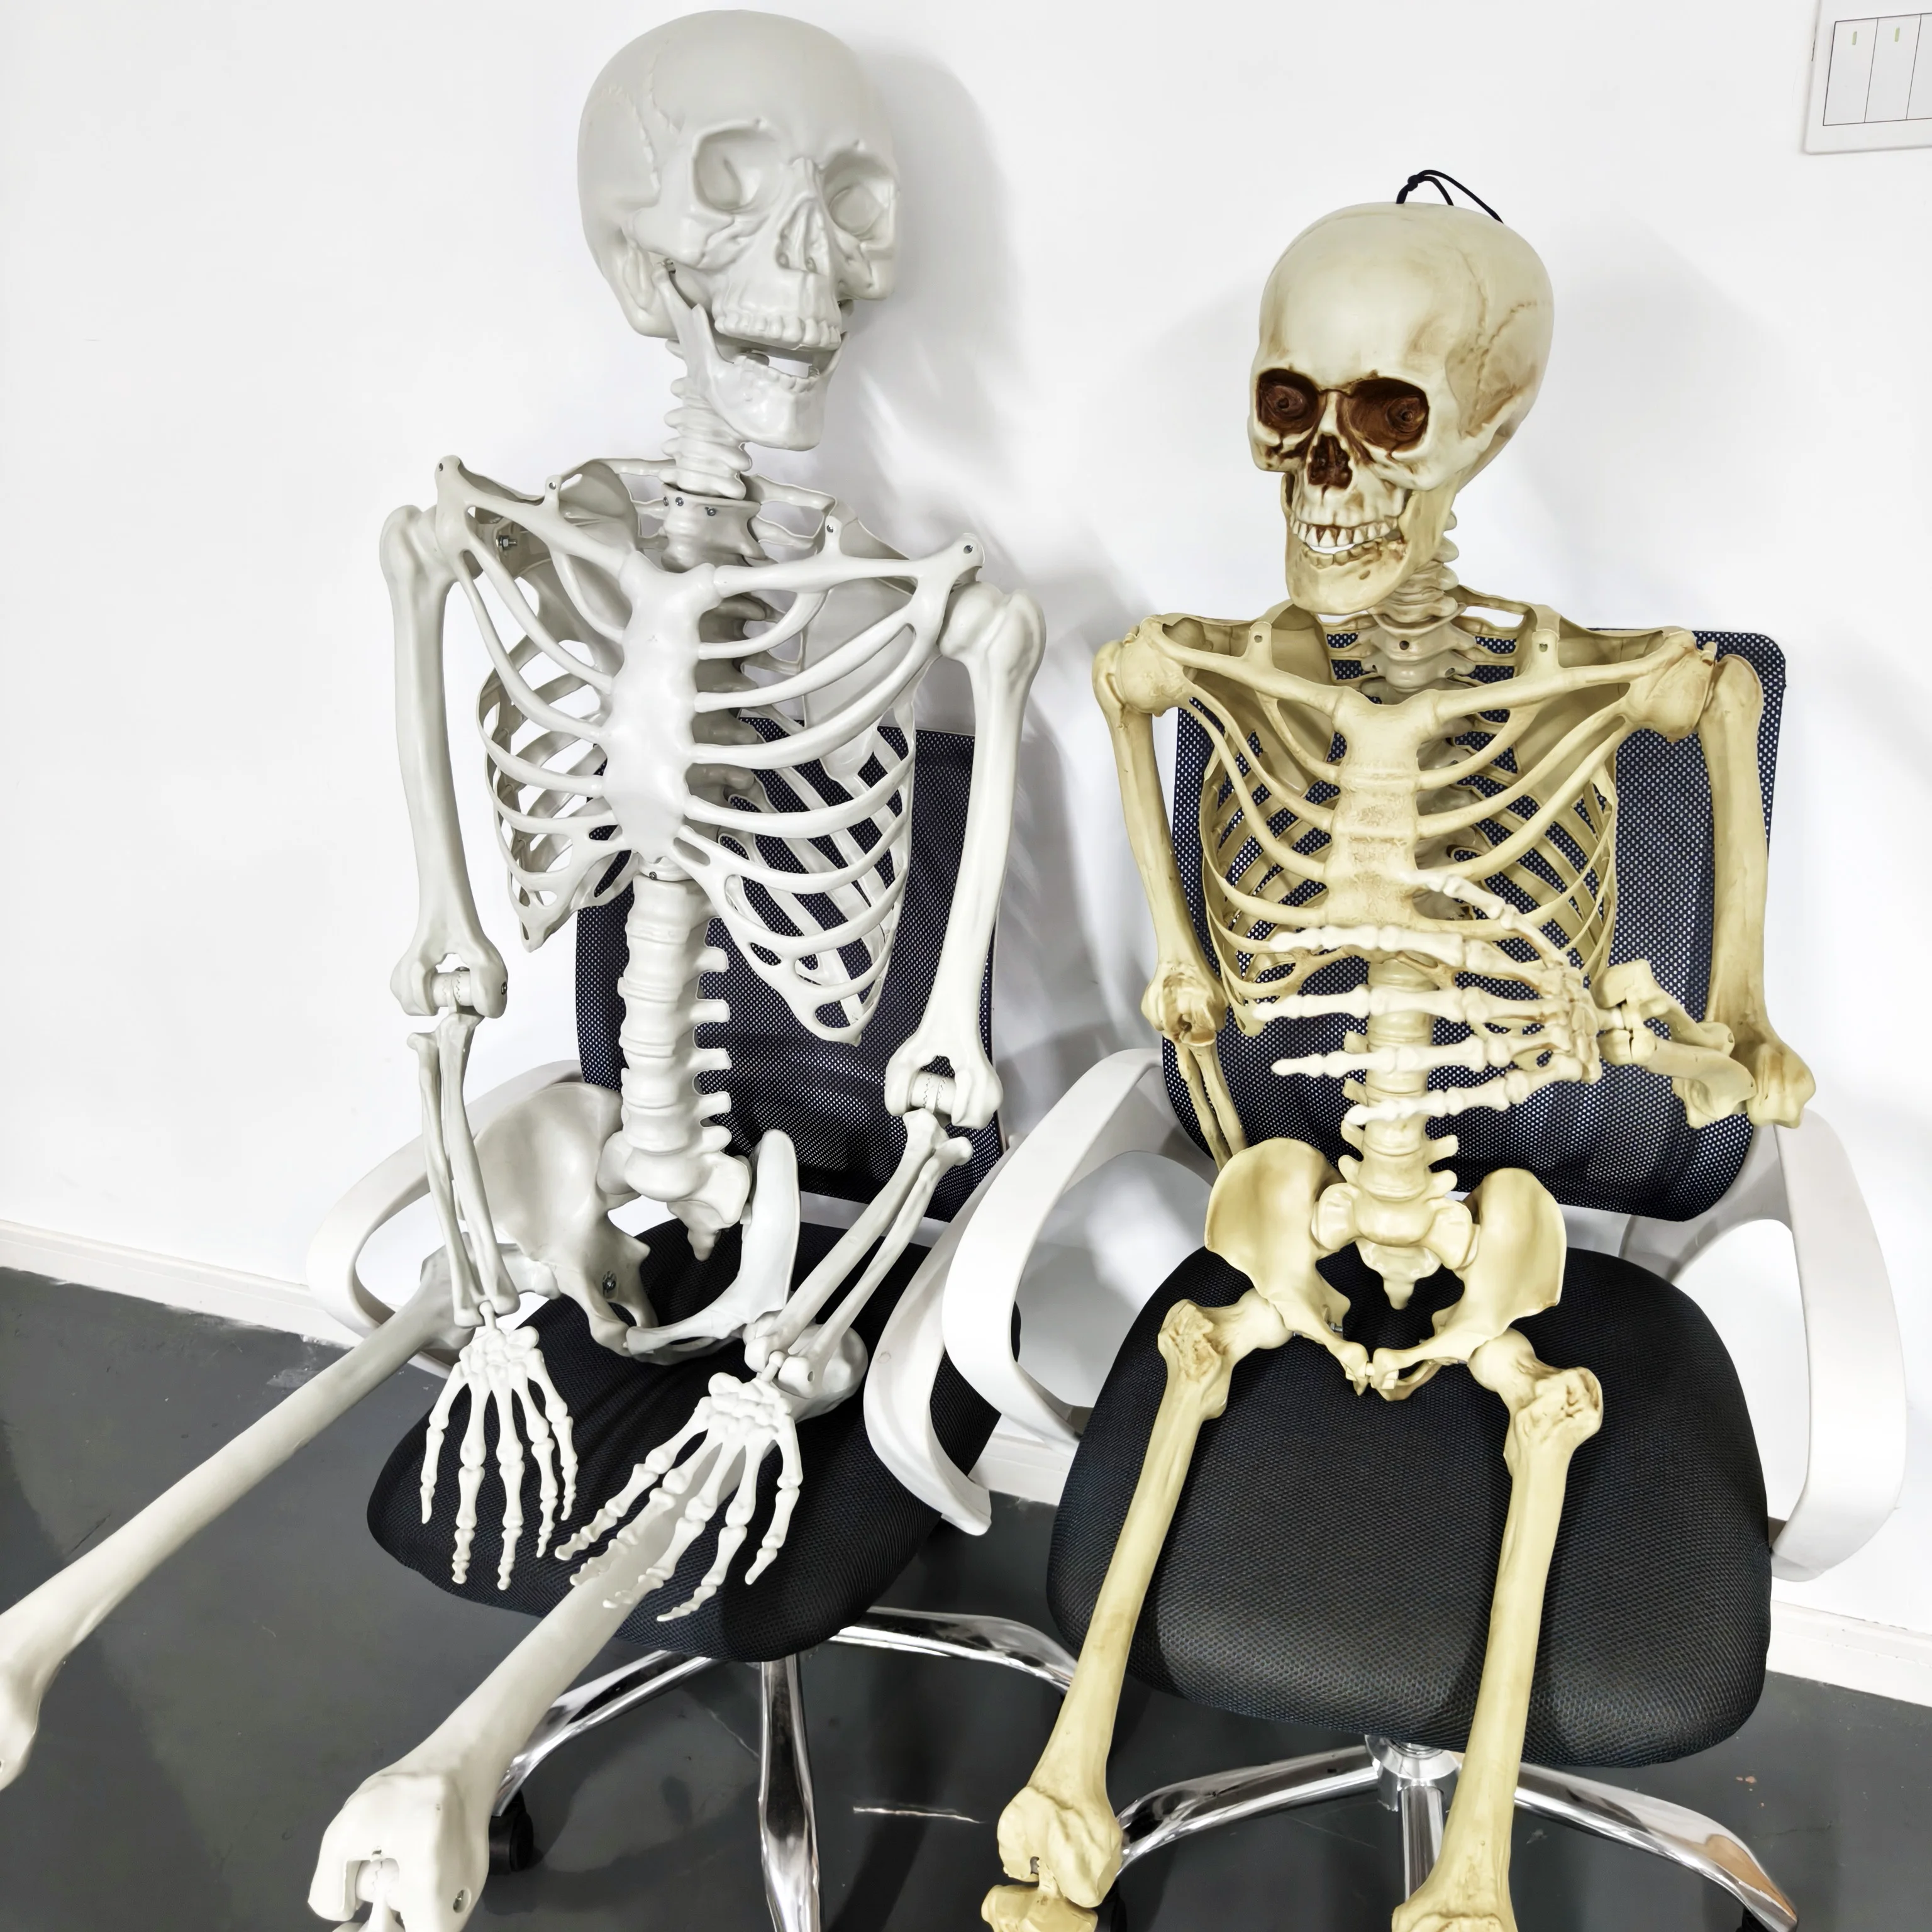 Animated High Quality Life Size Halloween Decorations Props Large Human Movable Joints Skeleton